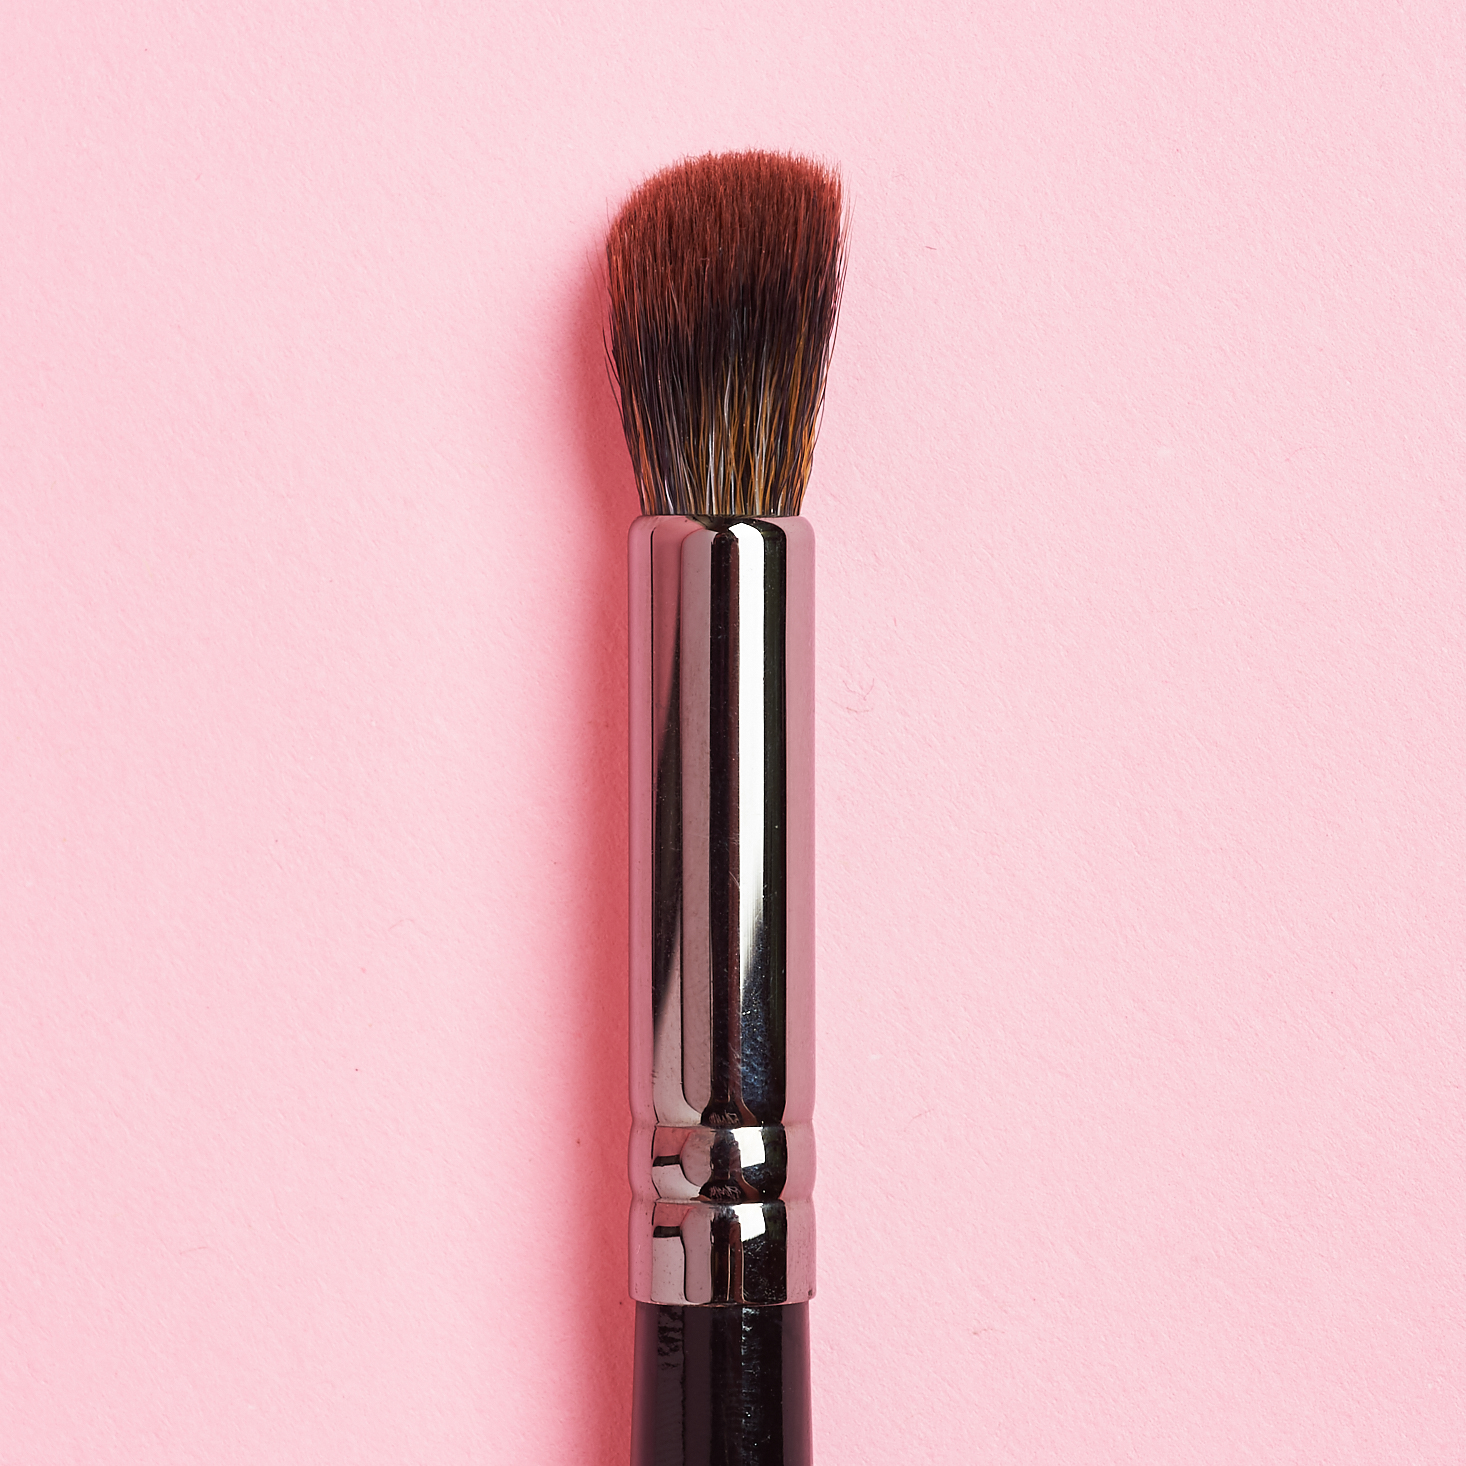 angled brush head with brown bristles